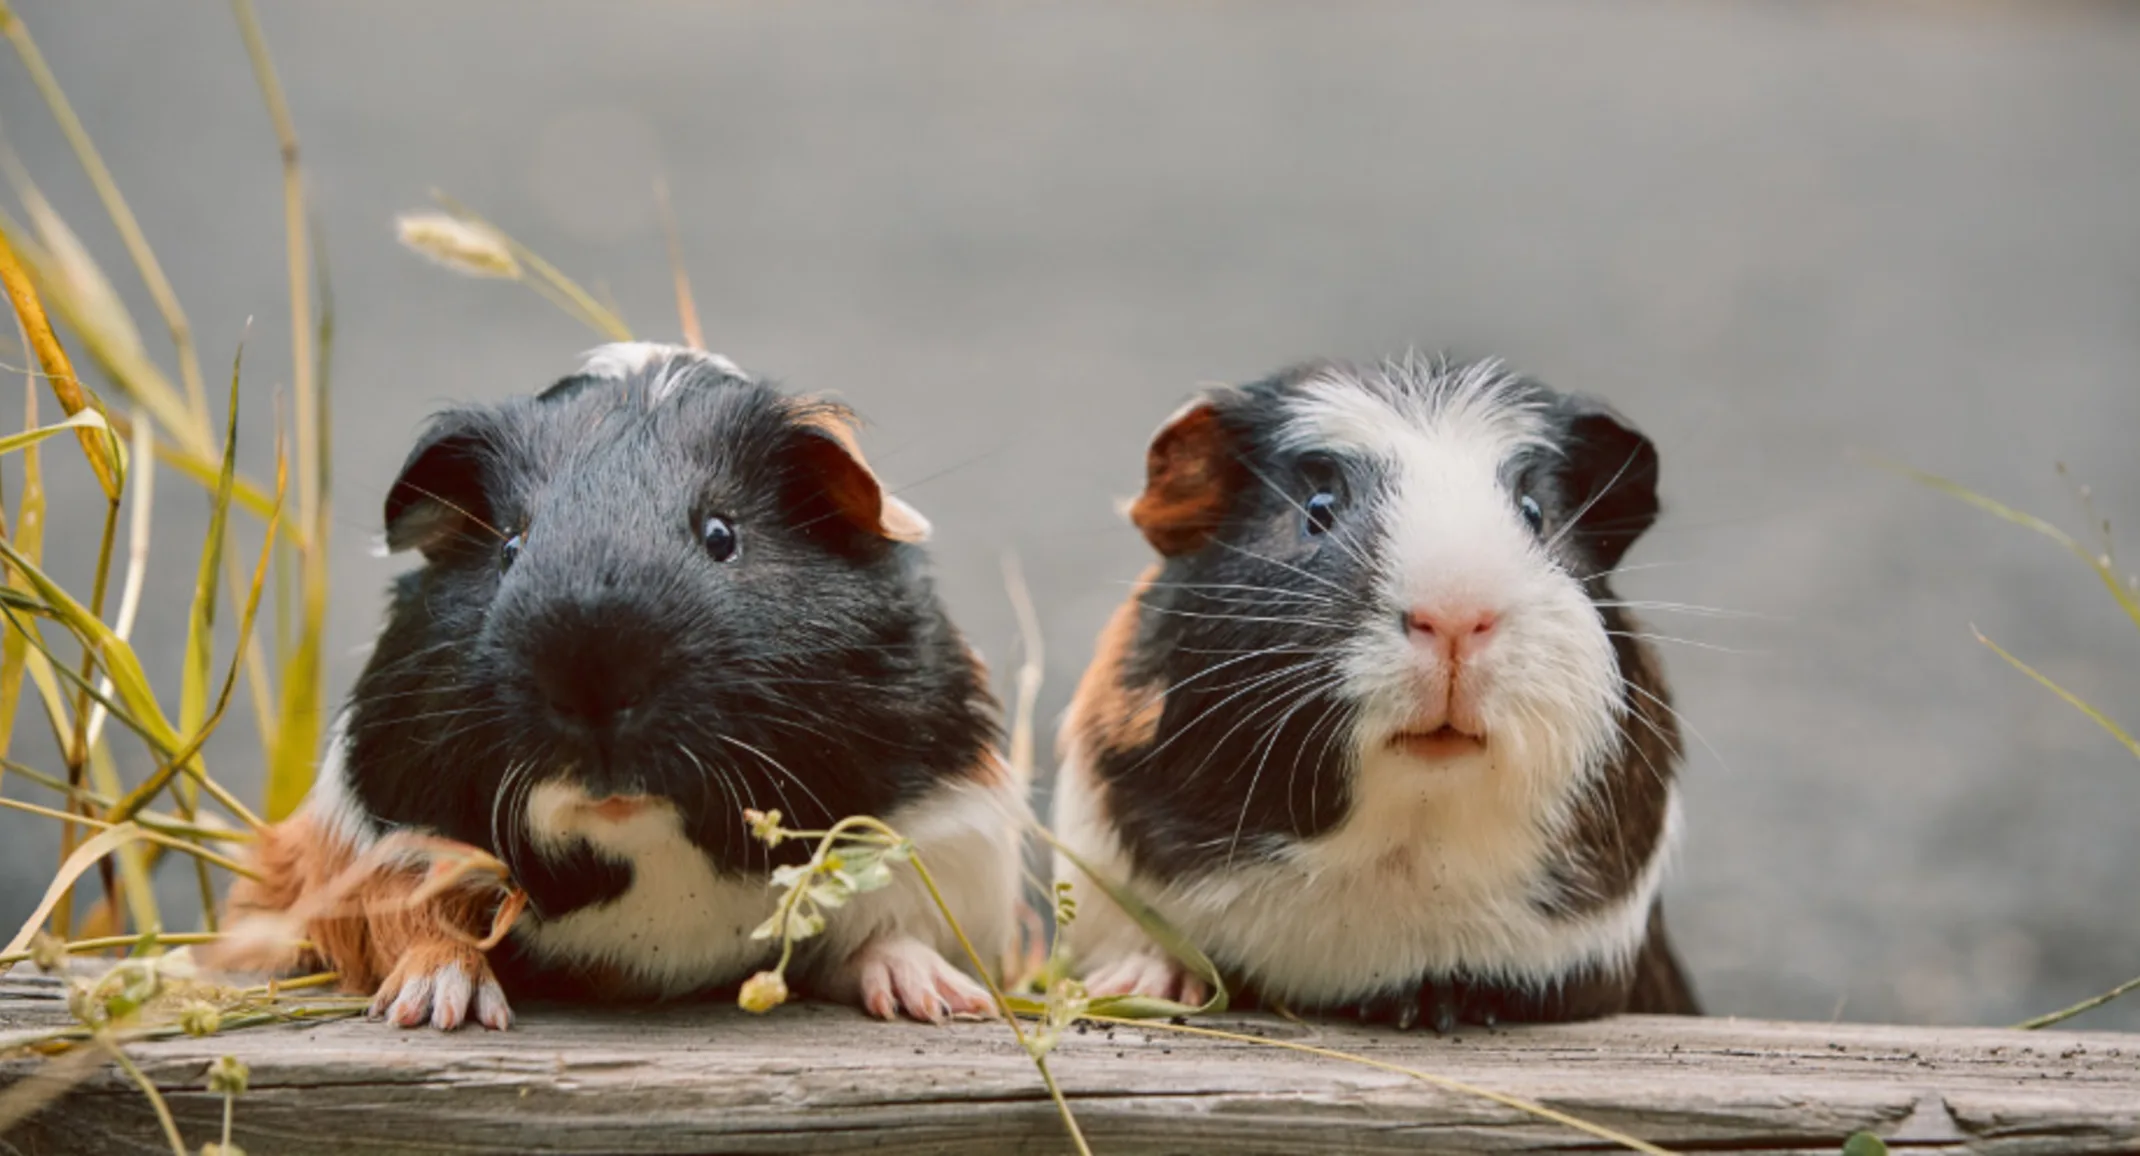 Two Guinea Pigs on a Wooden Plank